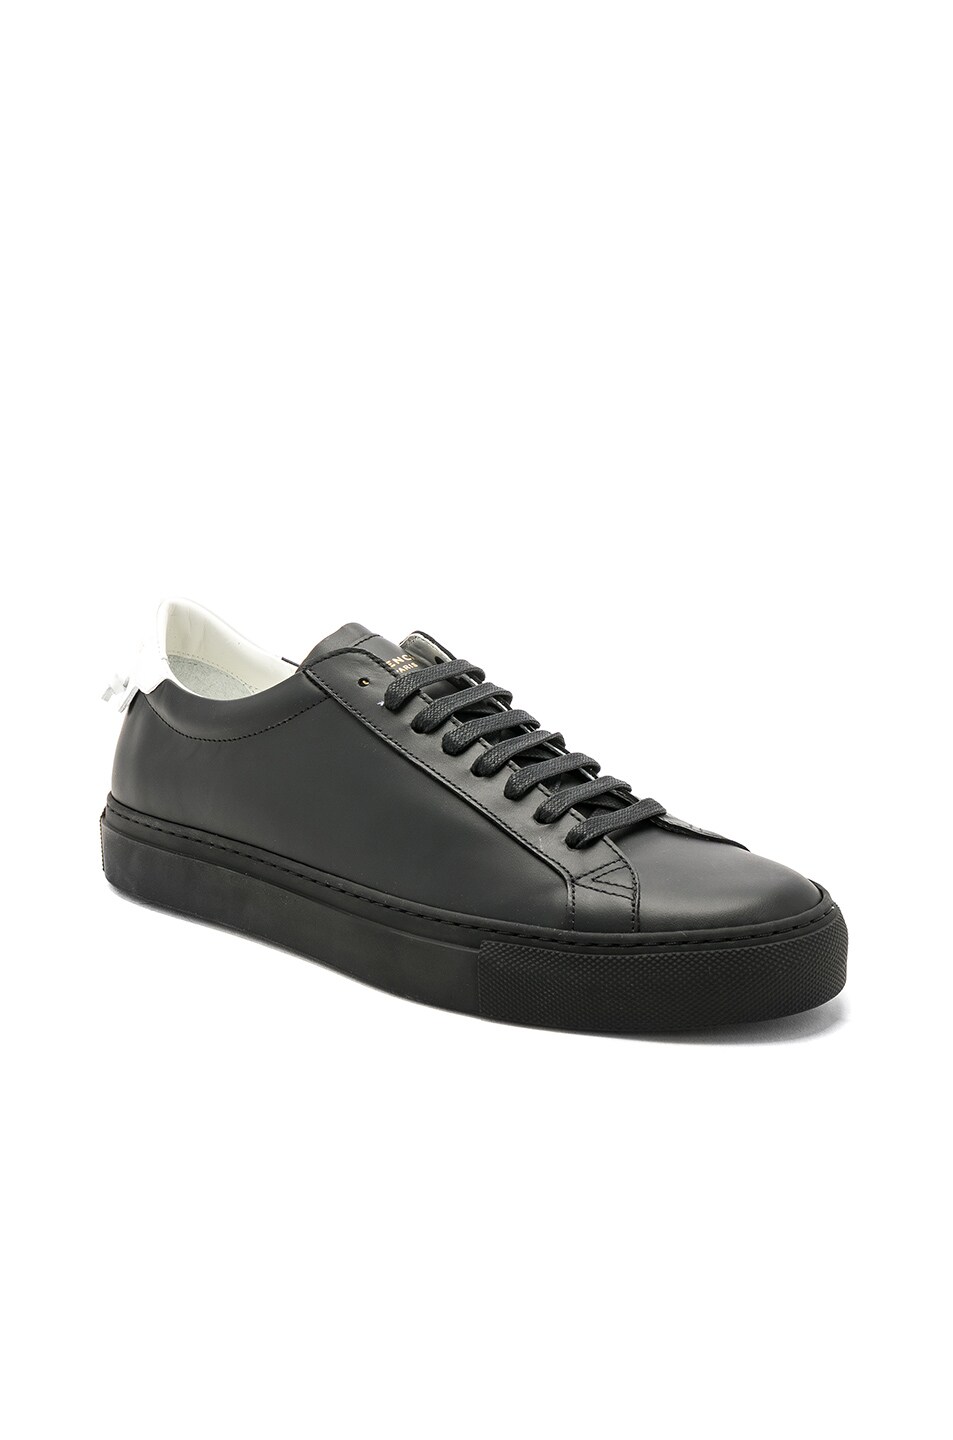 Image 1 of Givenchy Leather Urban Street Low Top Sneakers in Black & White